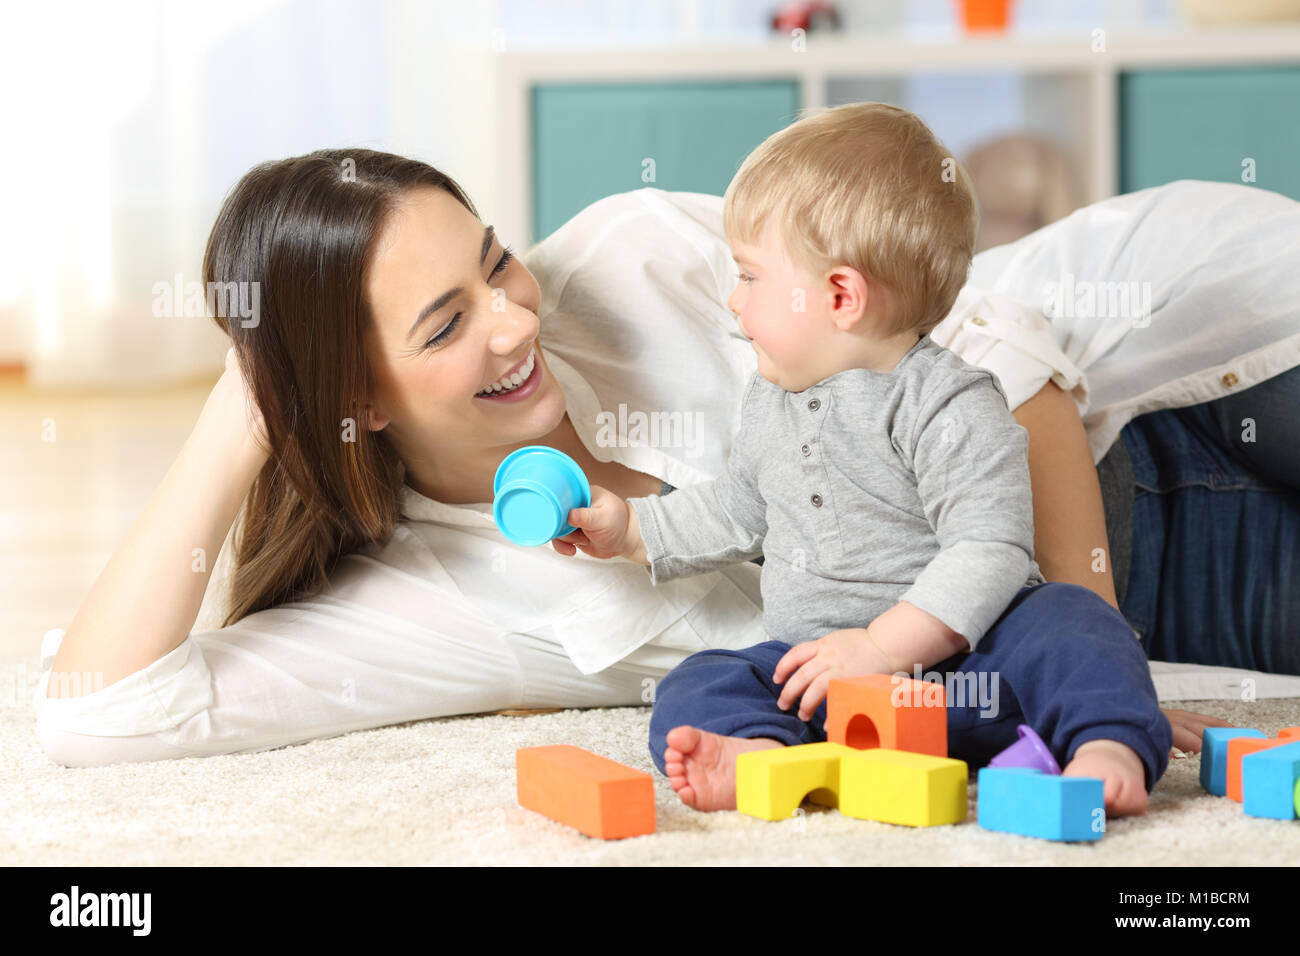 Joyful mother and baby playing with toys on a carpet at home Stock Photo